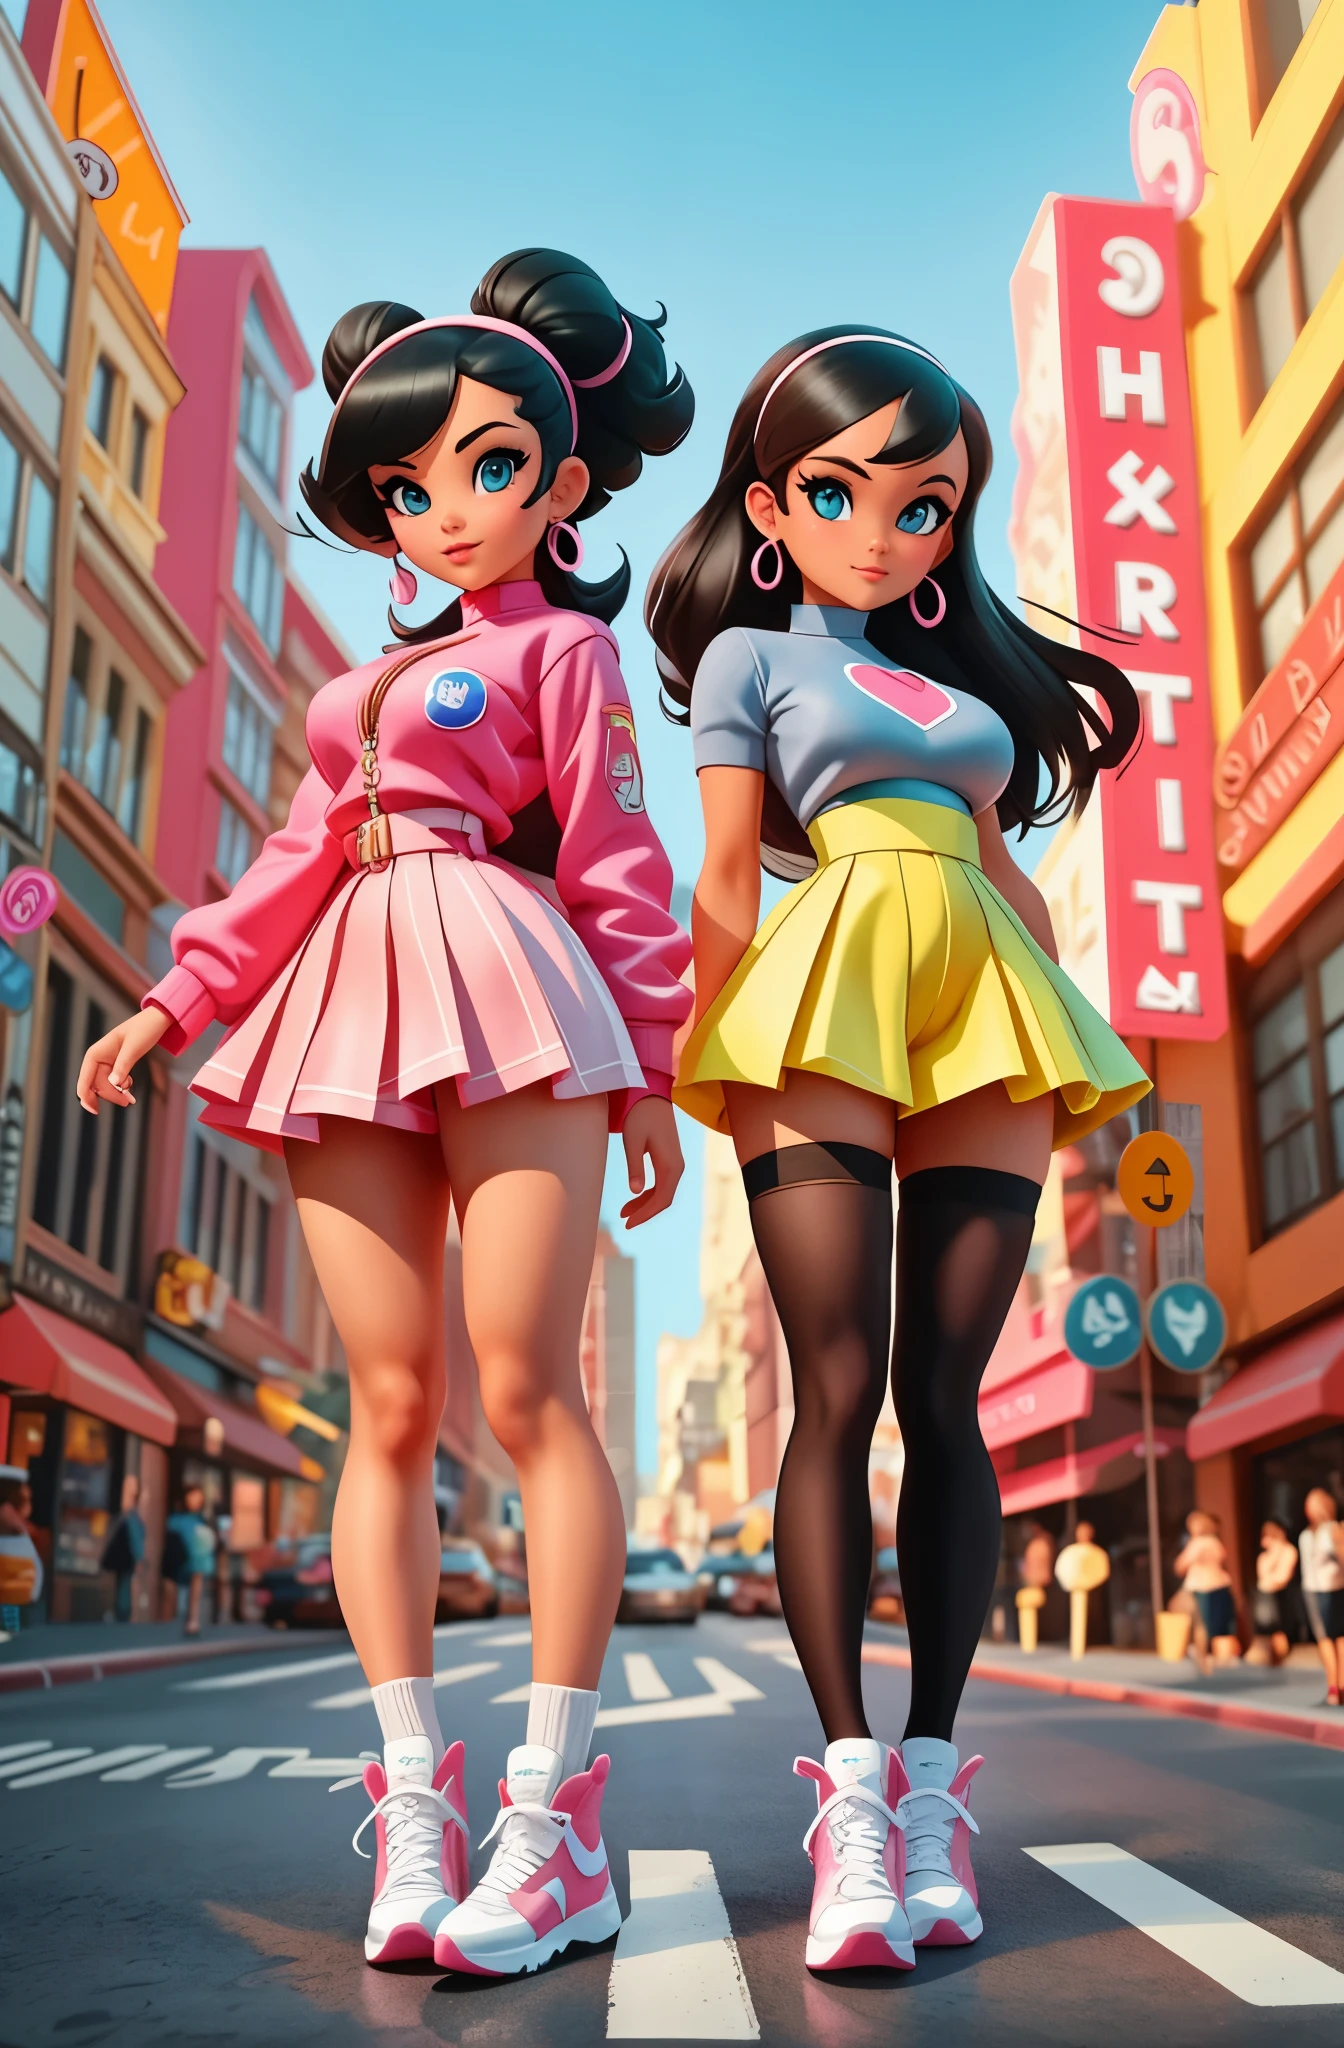 2girls in underwear are standing in a city street, style artgerm, artgerm style, extremely detailed artgerm, style of artgerm, in style of artgerm, as seen on artgerm, range murata and artgerm, ! dream artgerm, in the style artgerm, ig model | artgerm, powerpuff girls